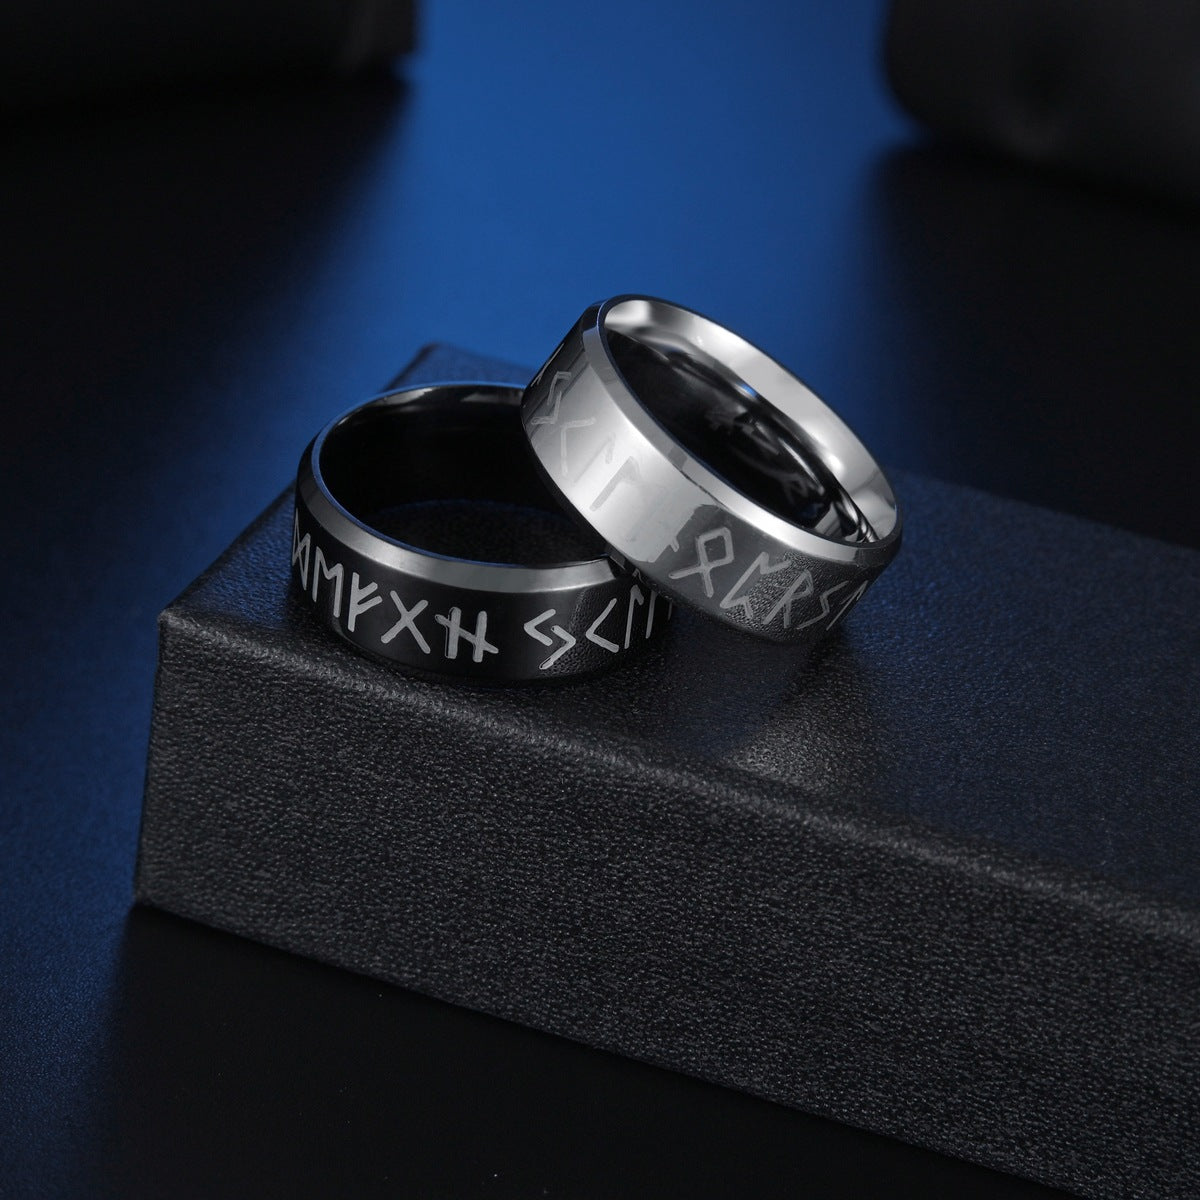 Norse Rune Viking Rings Set for Men by Planderful - Steel Three-Piece Hand Ornaments